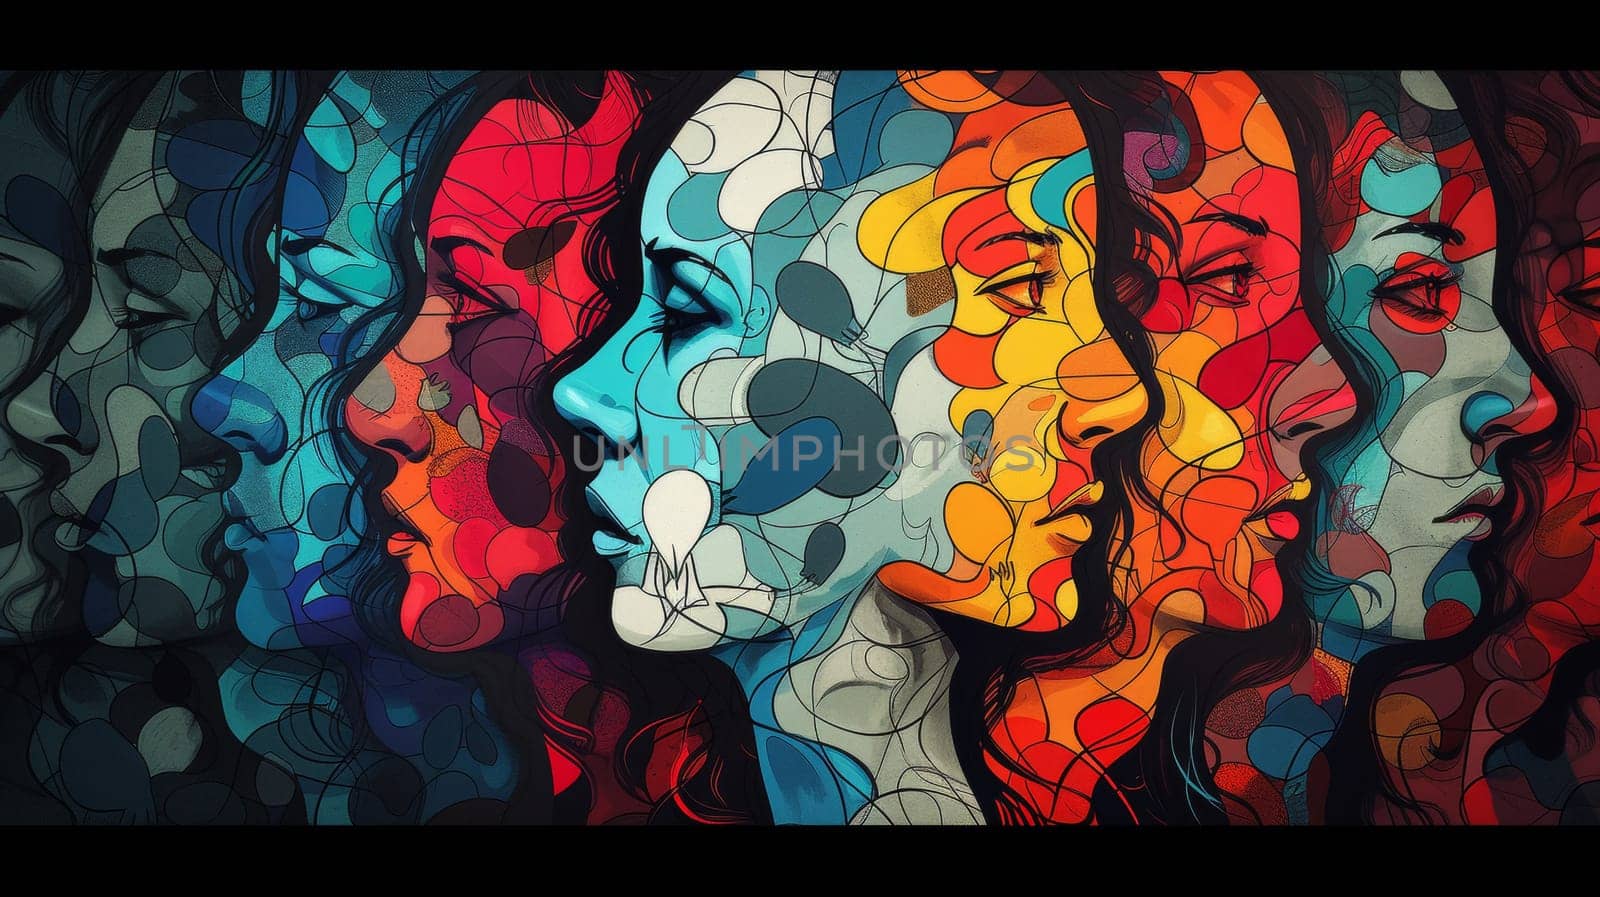 A group of faces painted in different colors and shapes, AI by starush